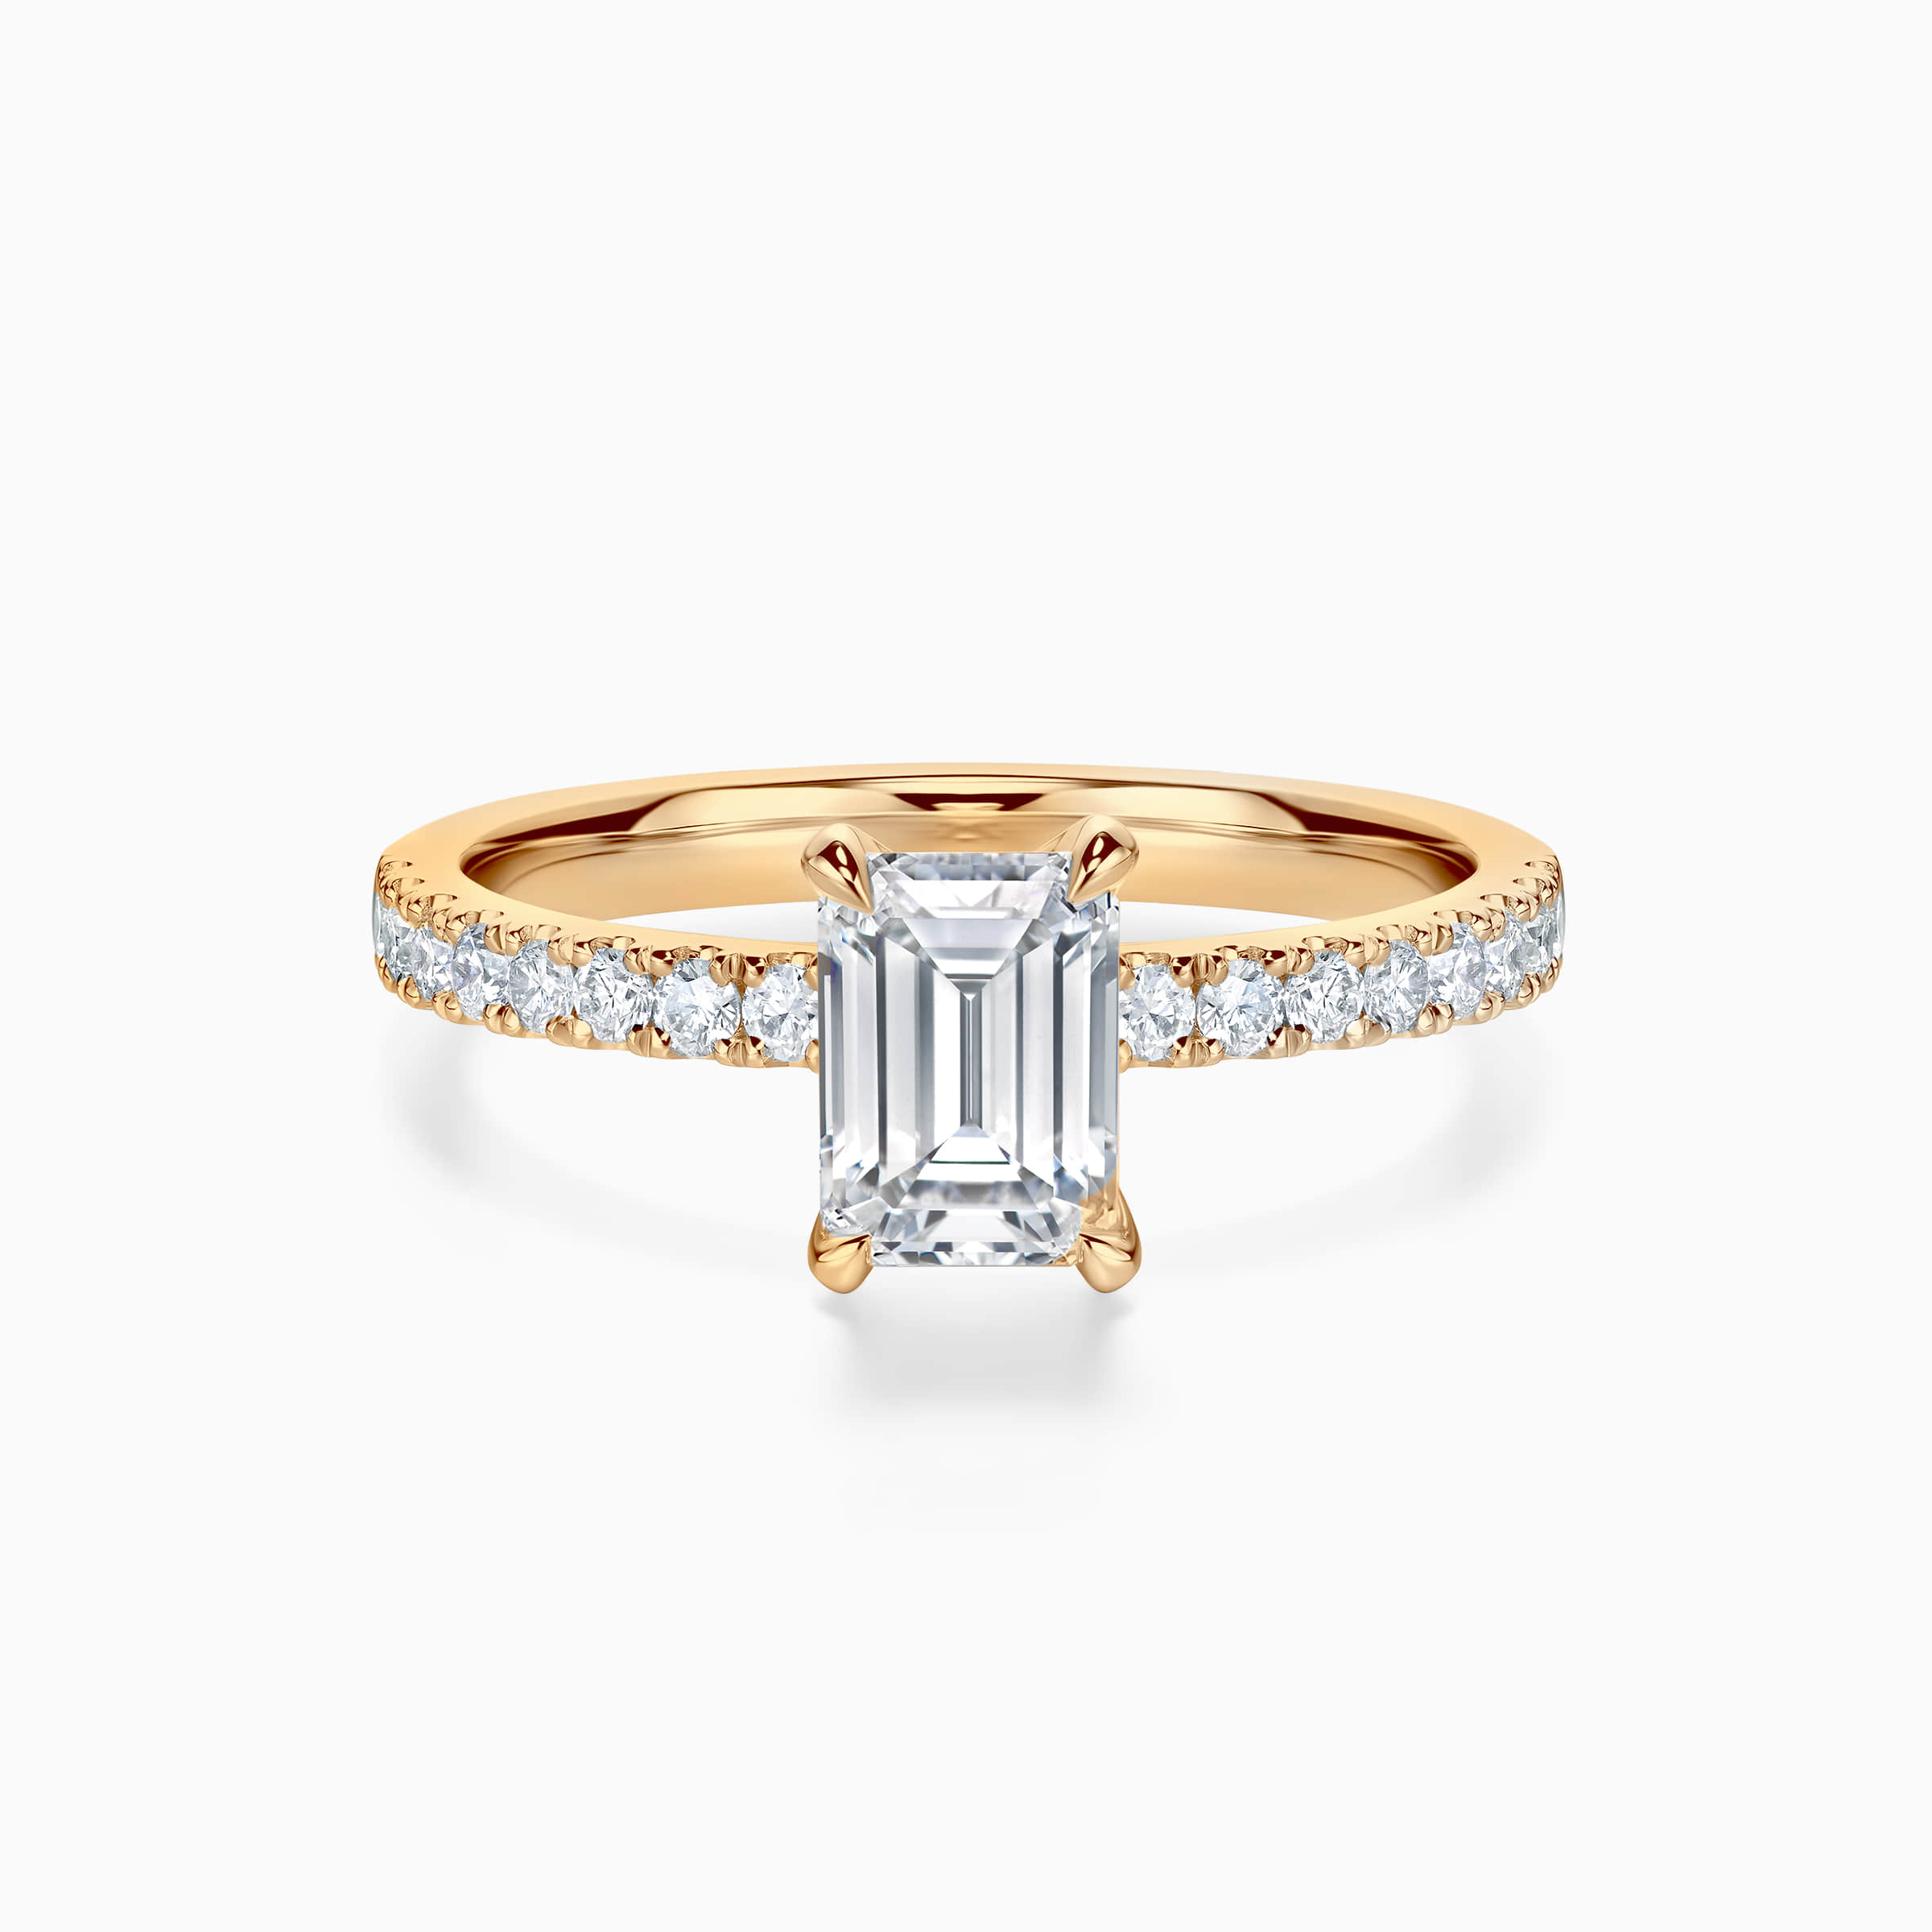 Darry Ring emerald cut promise ring in yellow gold